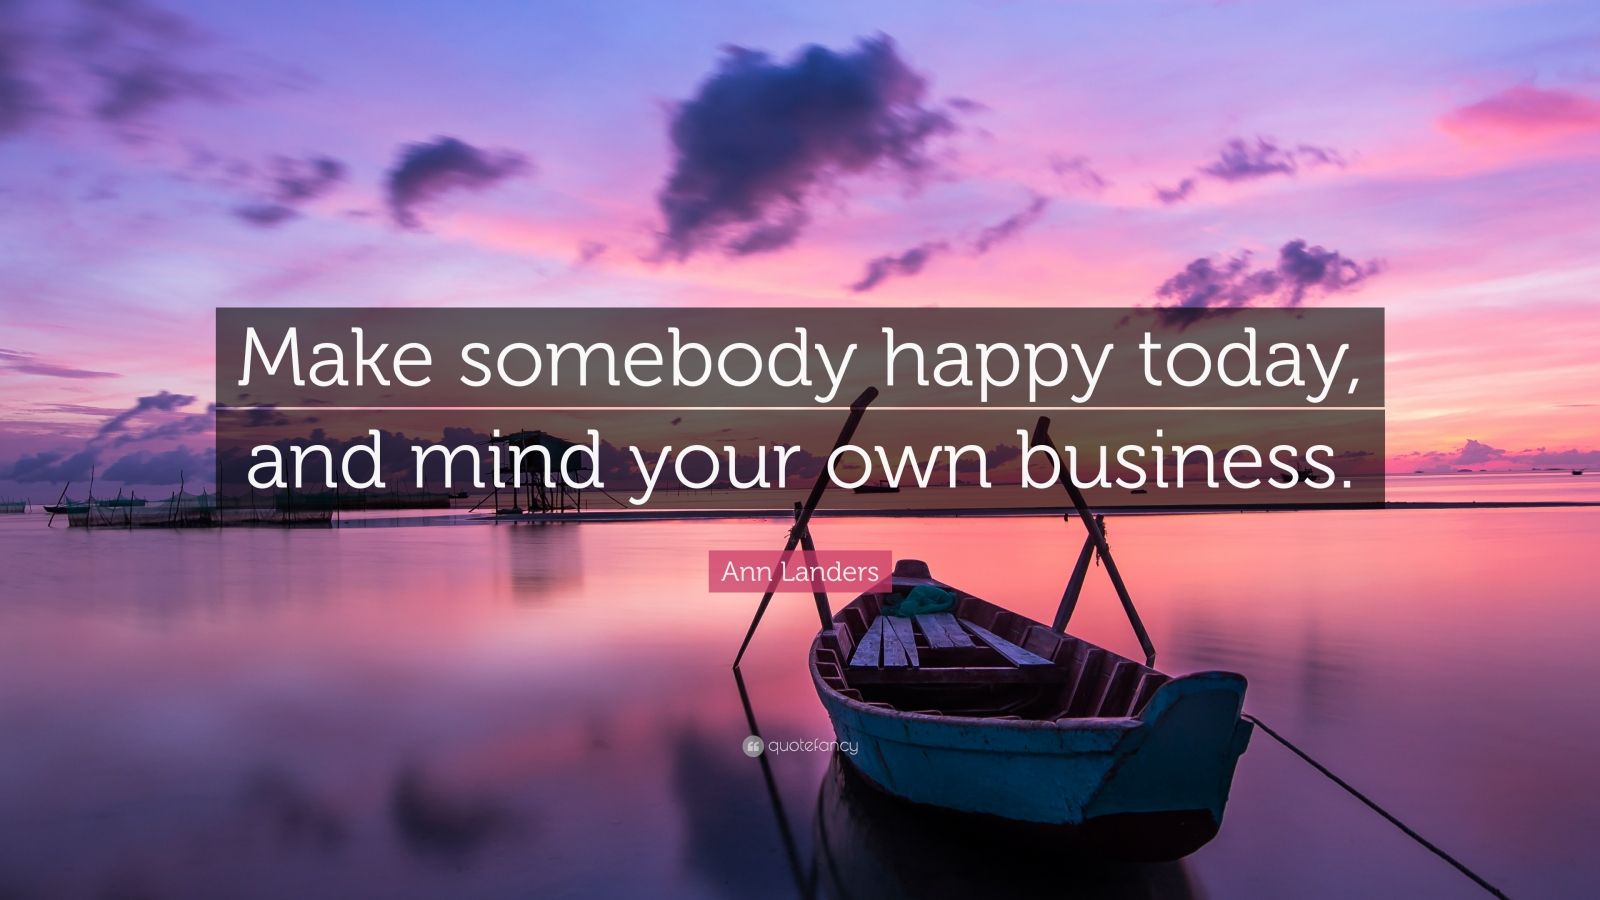 Ann Landers Quote: “Make somebody happy today, and mind your own